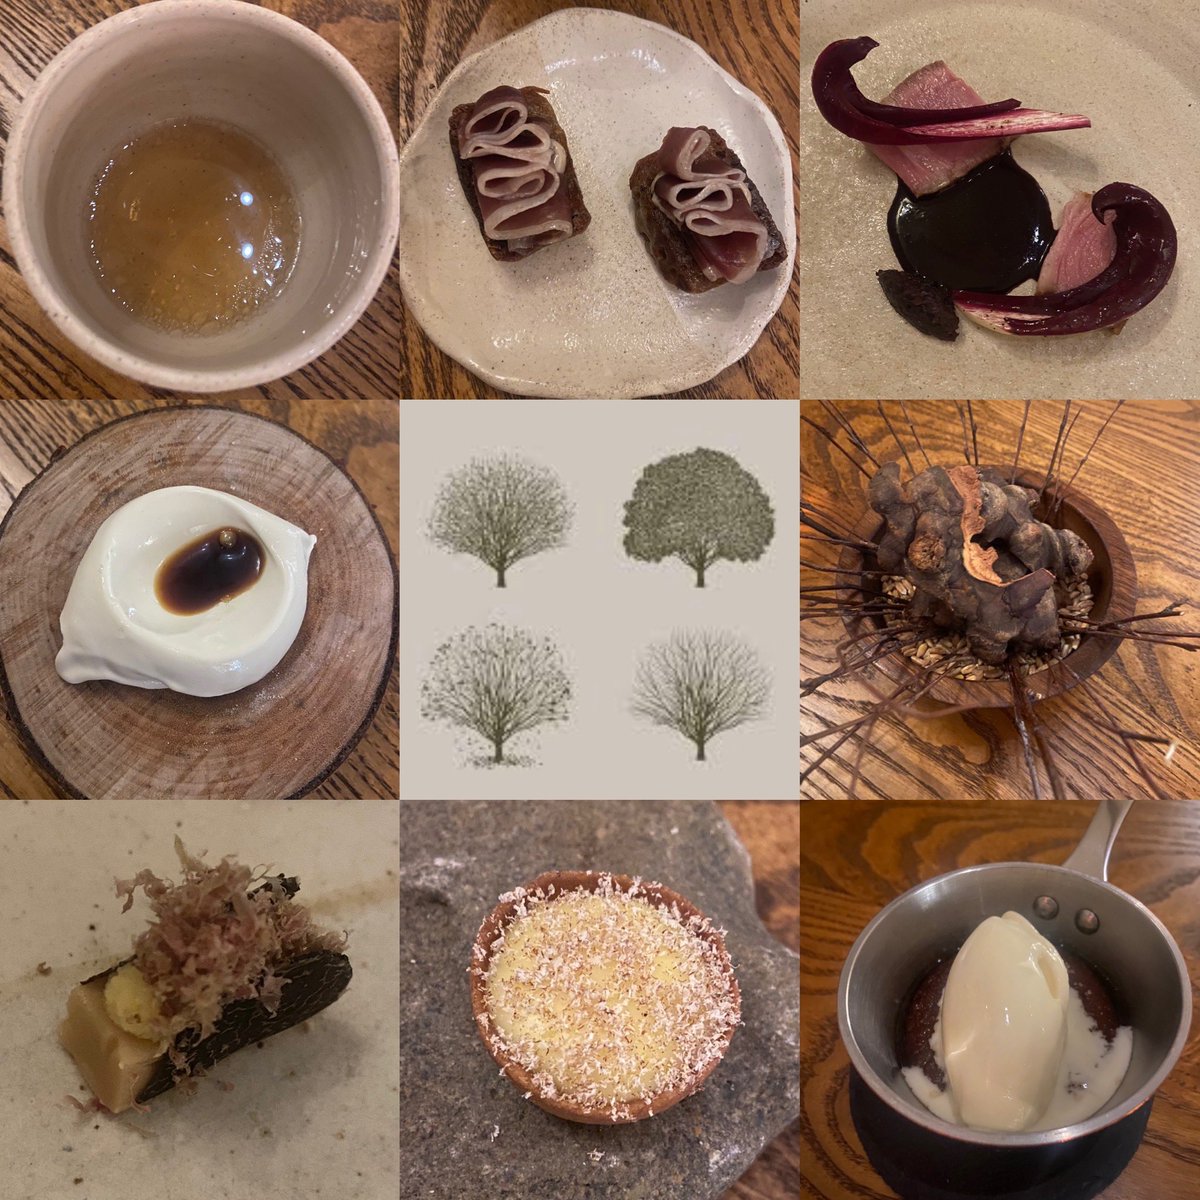 We have been reminiscing back on our North Yorkshire foodie weekend away at the beginning of March with our Friday night visit to the Michelin starred @restaurantmyse in Hovingham.

tastesandtextures.co.uk/michelin-star/…

#greatfood #foodblog #yorkshire #michelinstar #tastingmenu